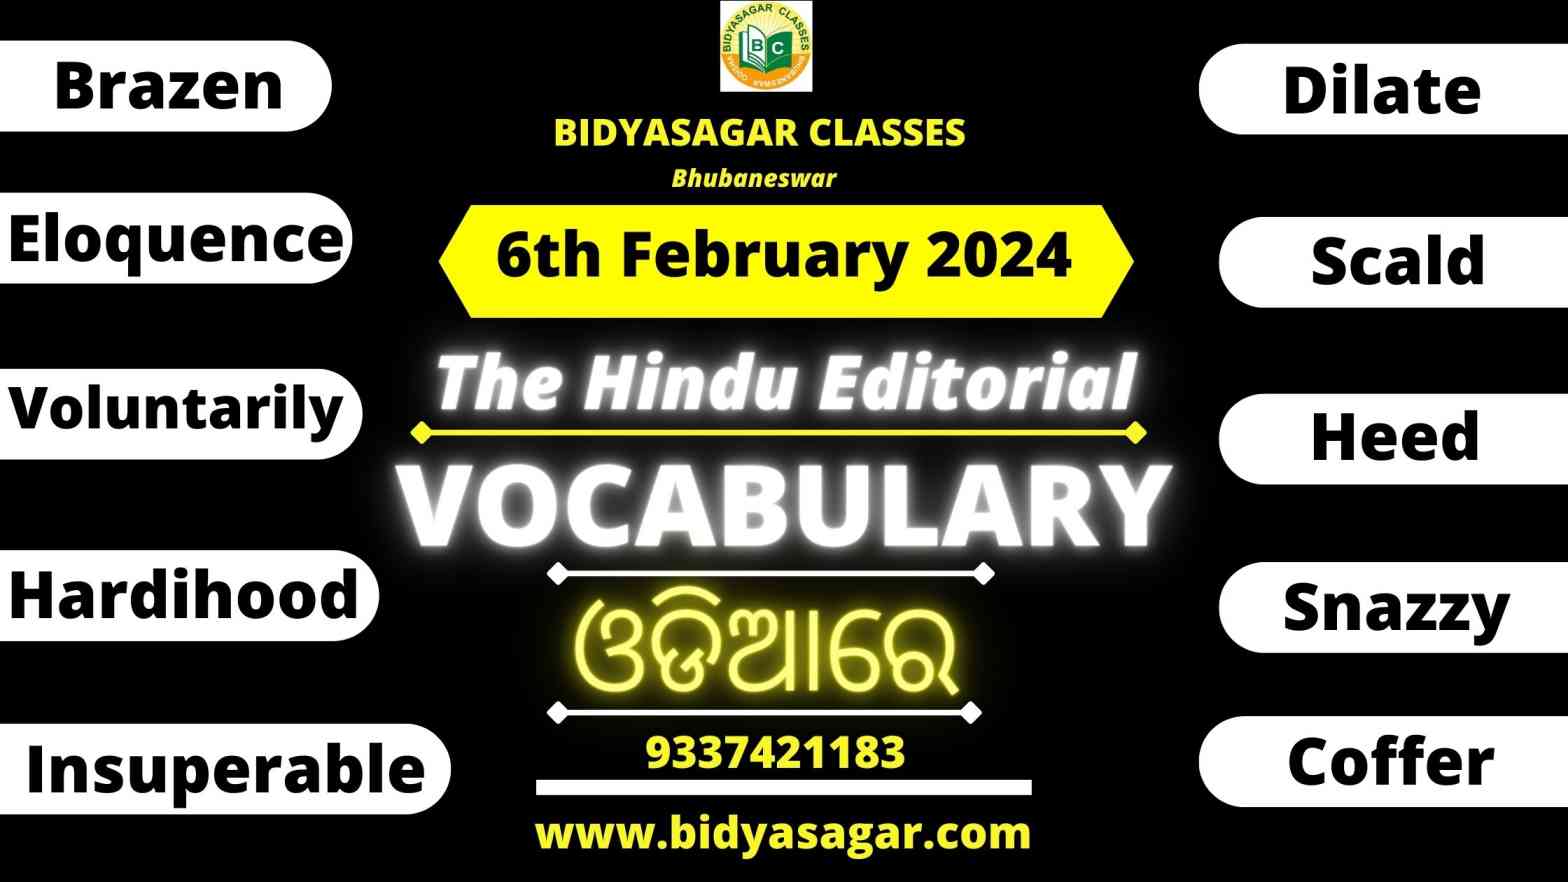 The Hindu Editorial Vocabulary of 6th February 2024